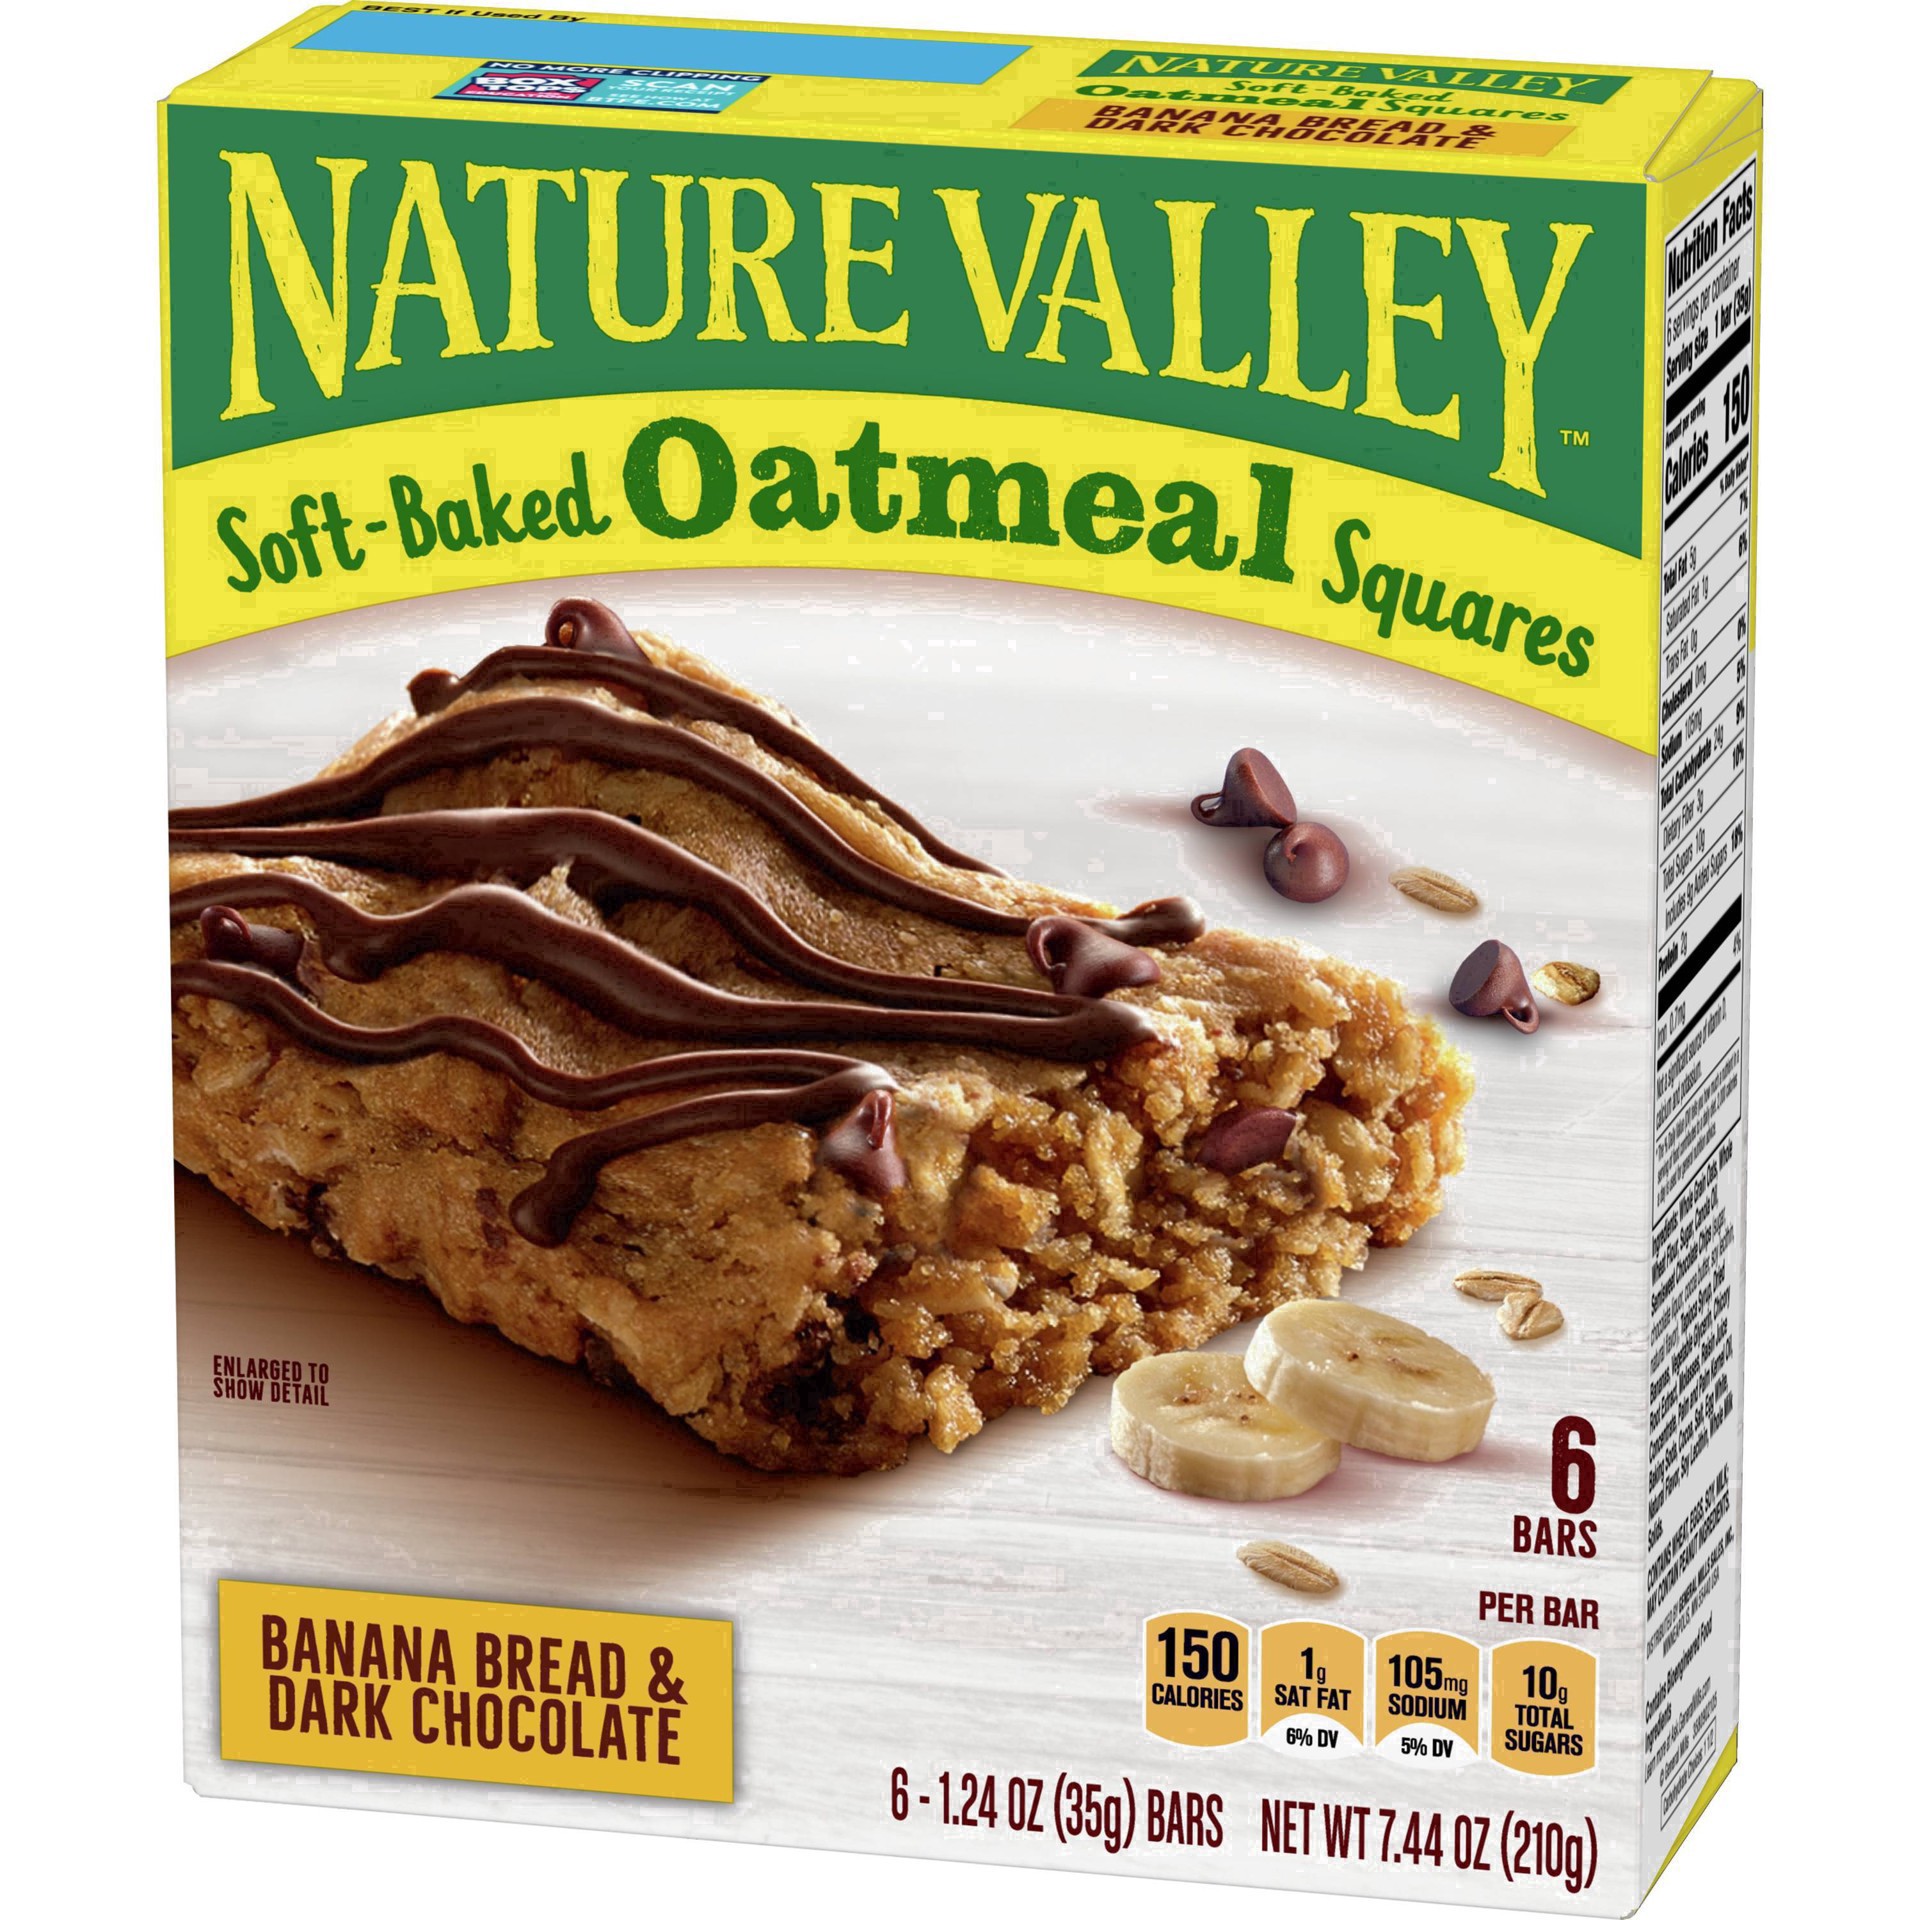 slide 66 of 101, Nature Valley Soft-Baked Oatmeal Squares, Banana Bread & Dark Chocolate, 6 ct, 6 ct